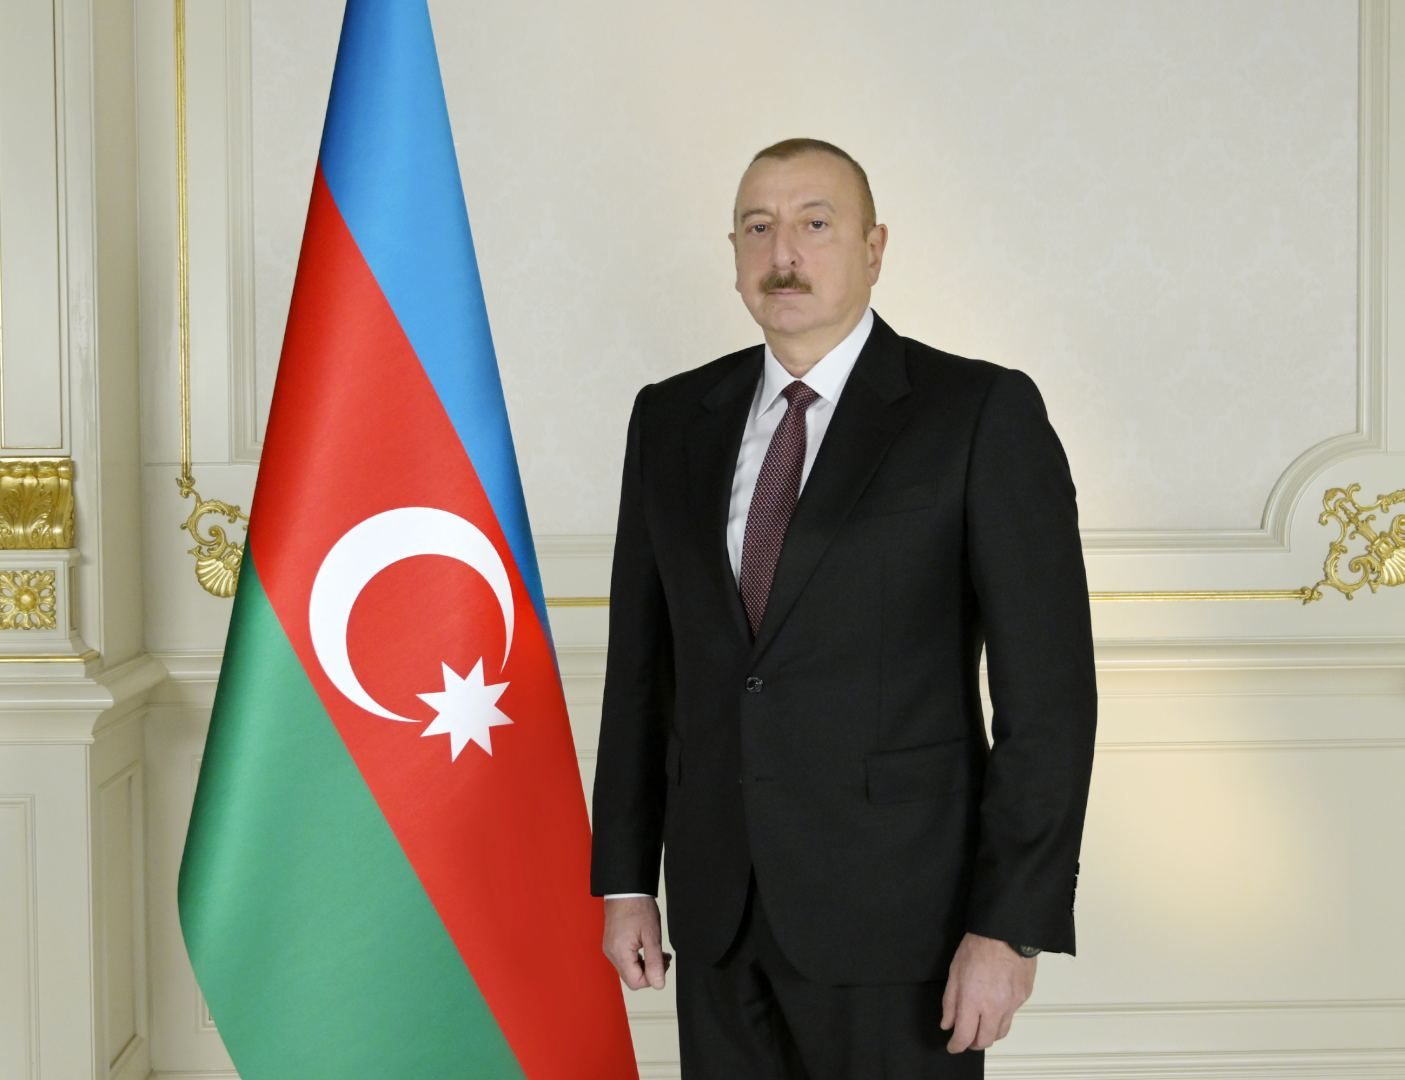 Azerbaijani President concludes his working visit to Russia